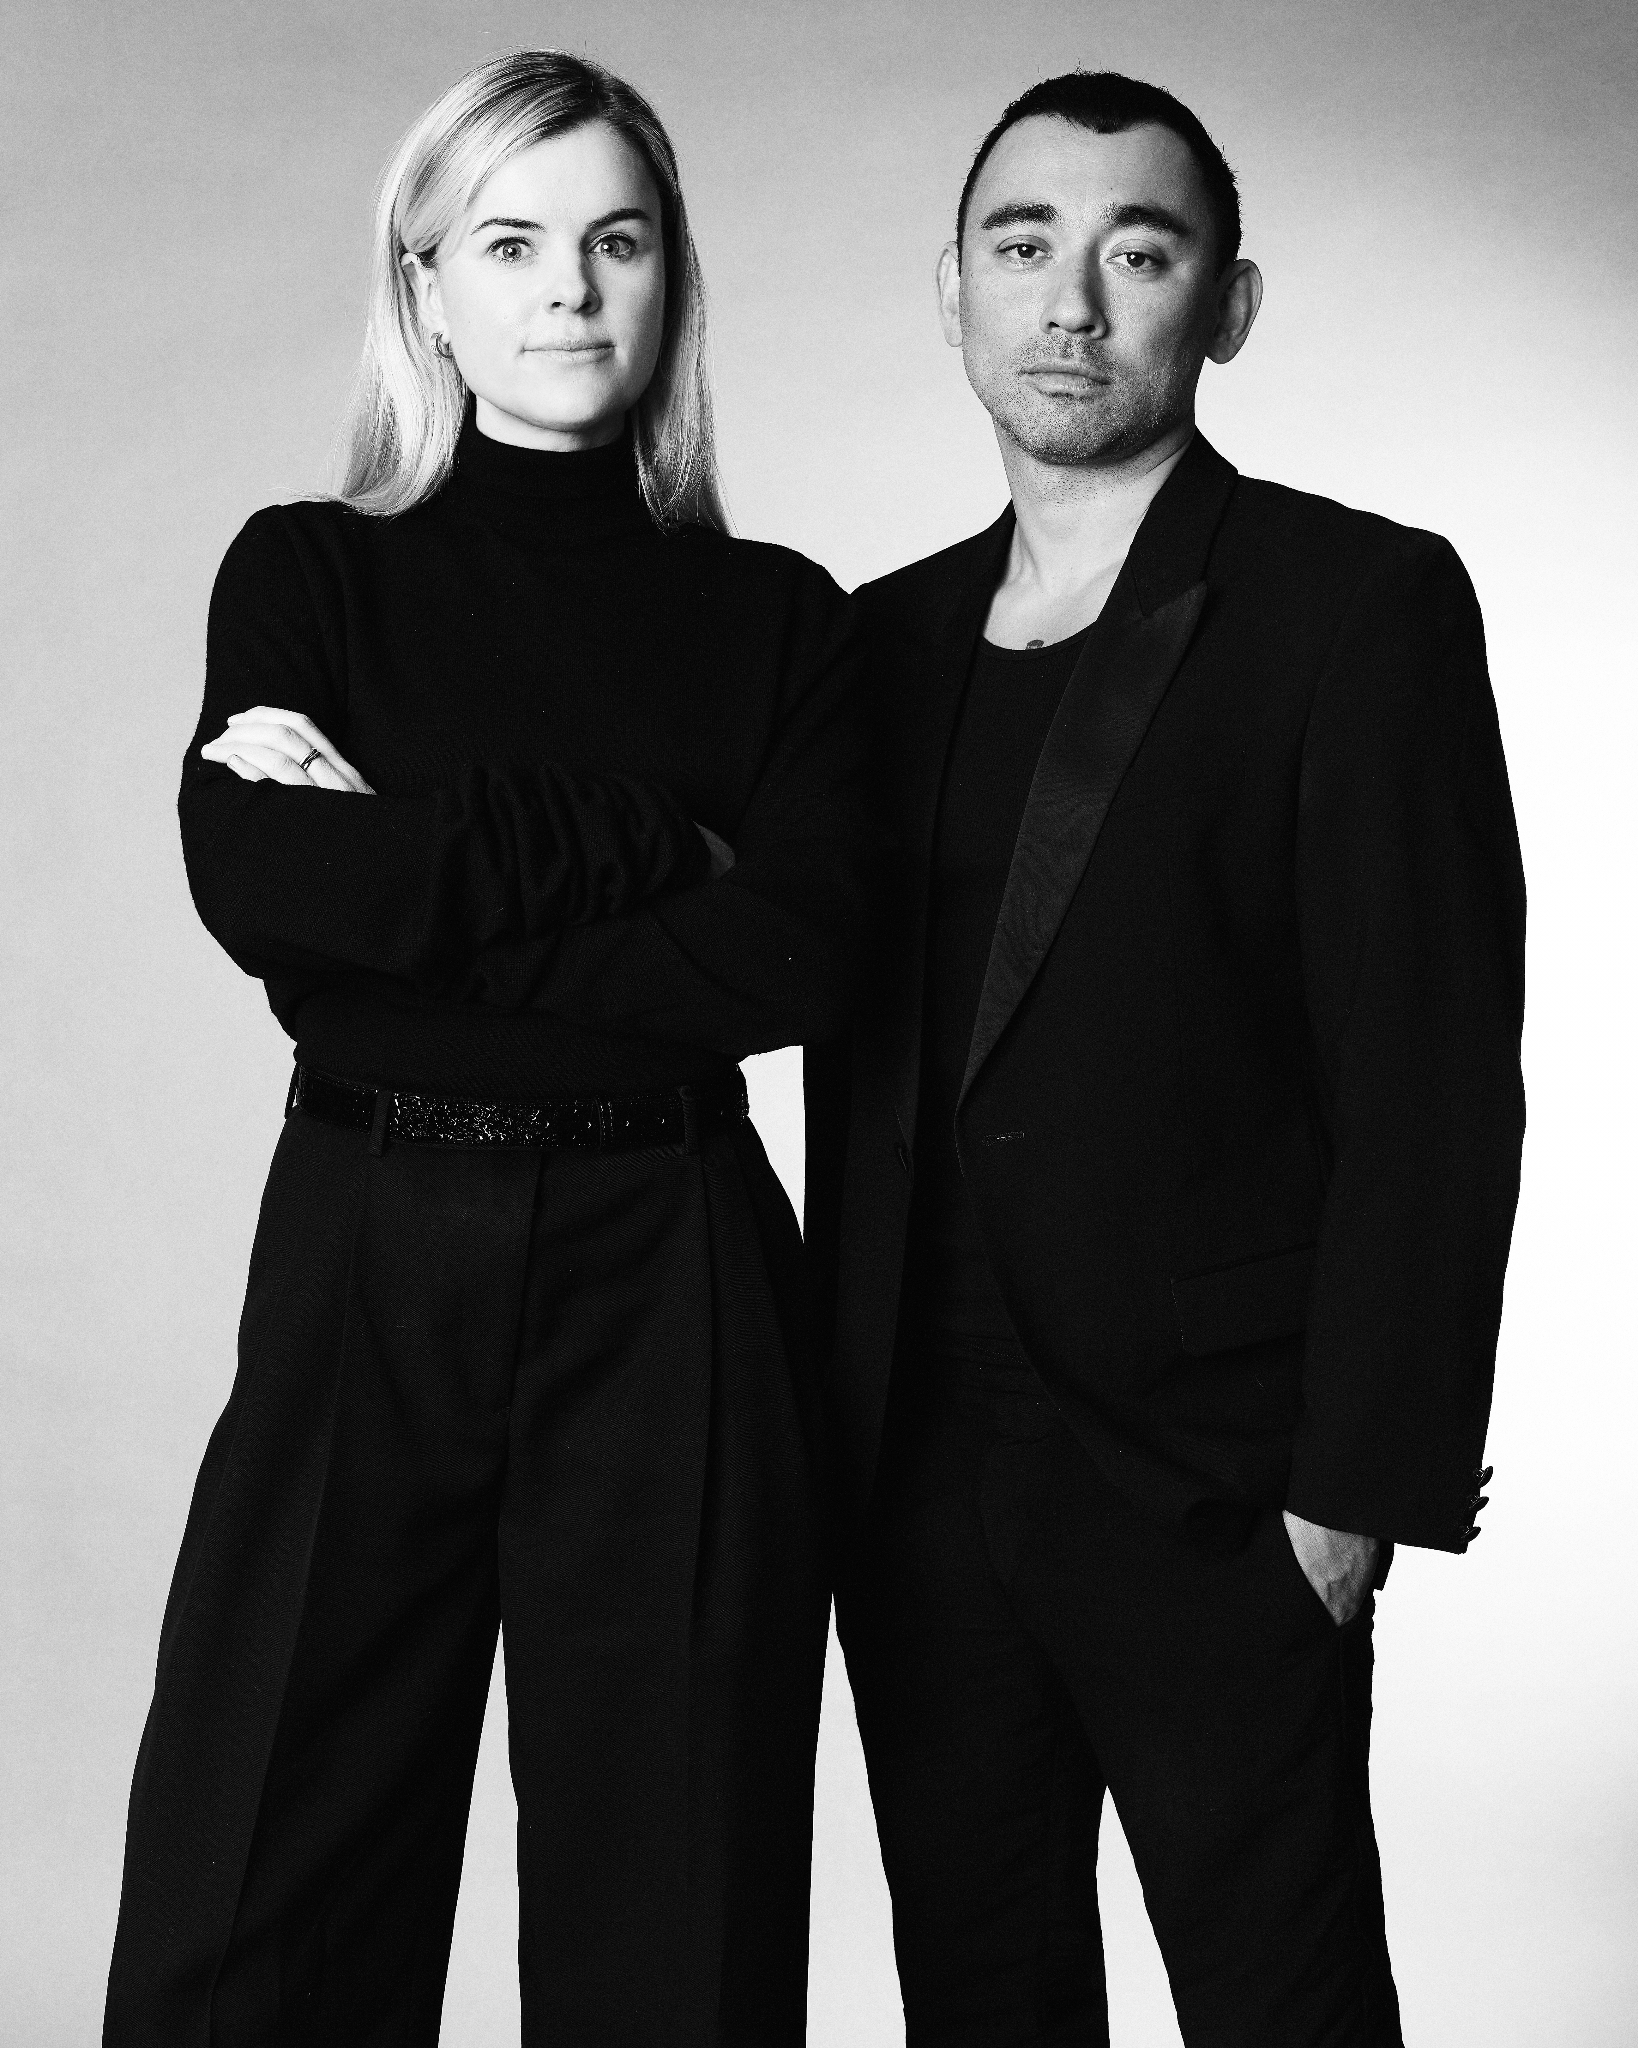 Nicola Formichetti joins SYKY as Artistic Director. Photo by James Bee.